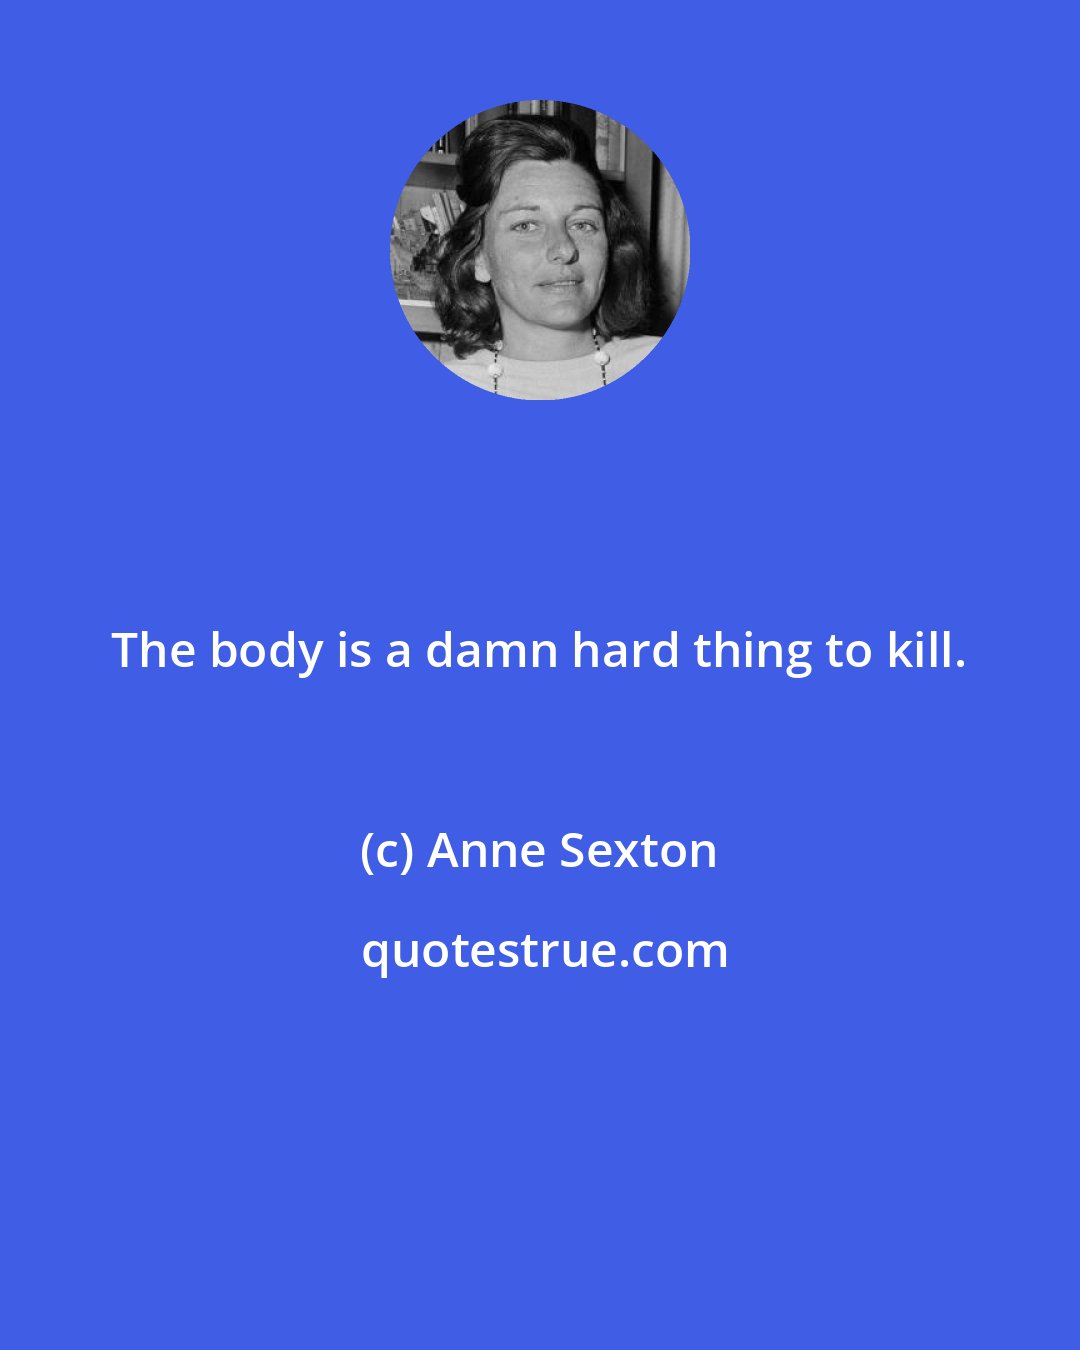 Anne Sexton: The body is a damn hard thing to kill.